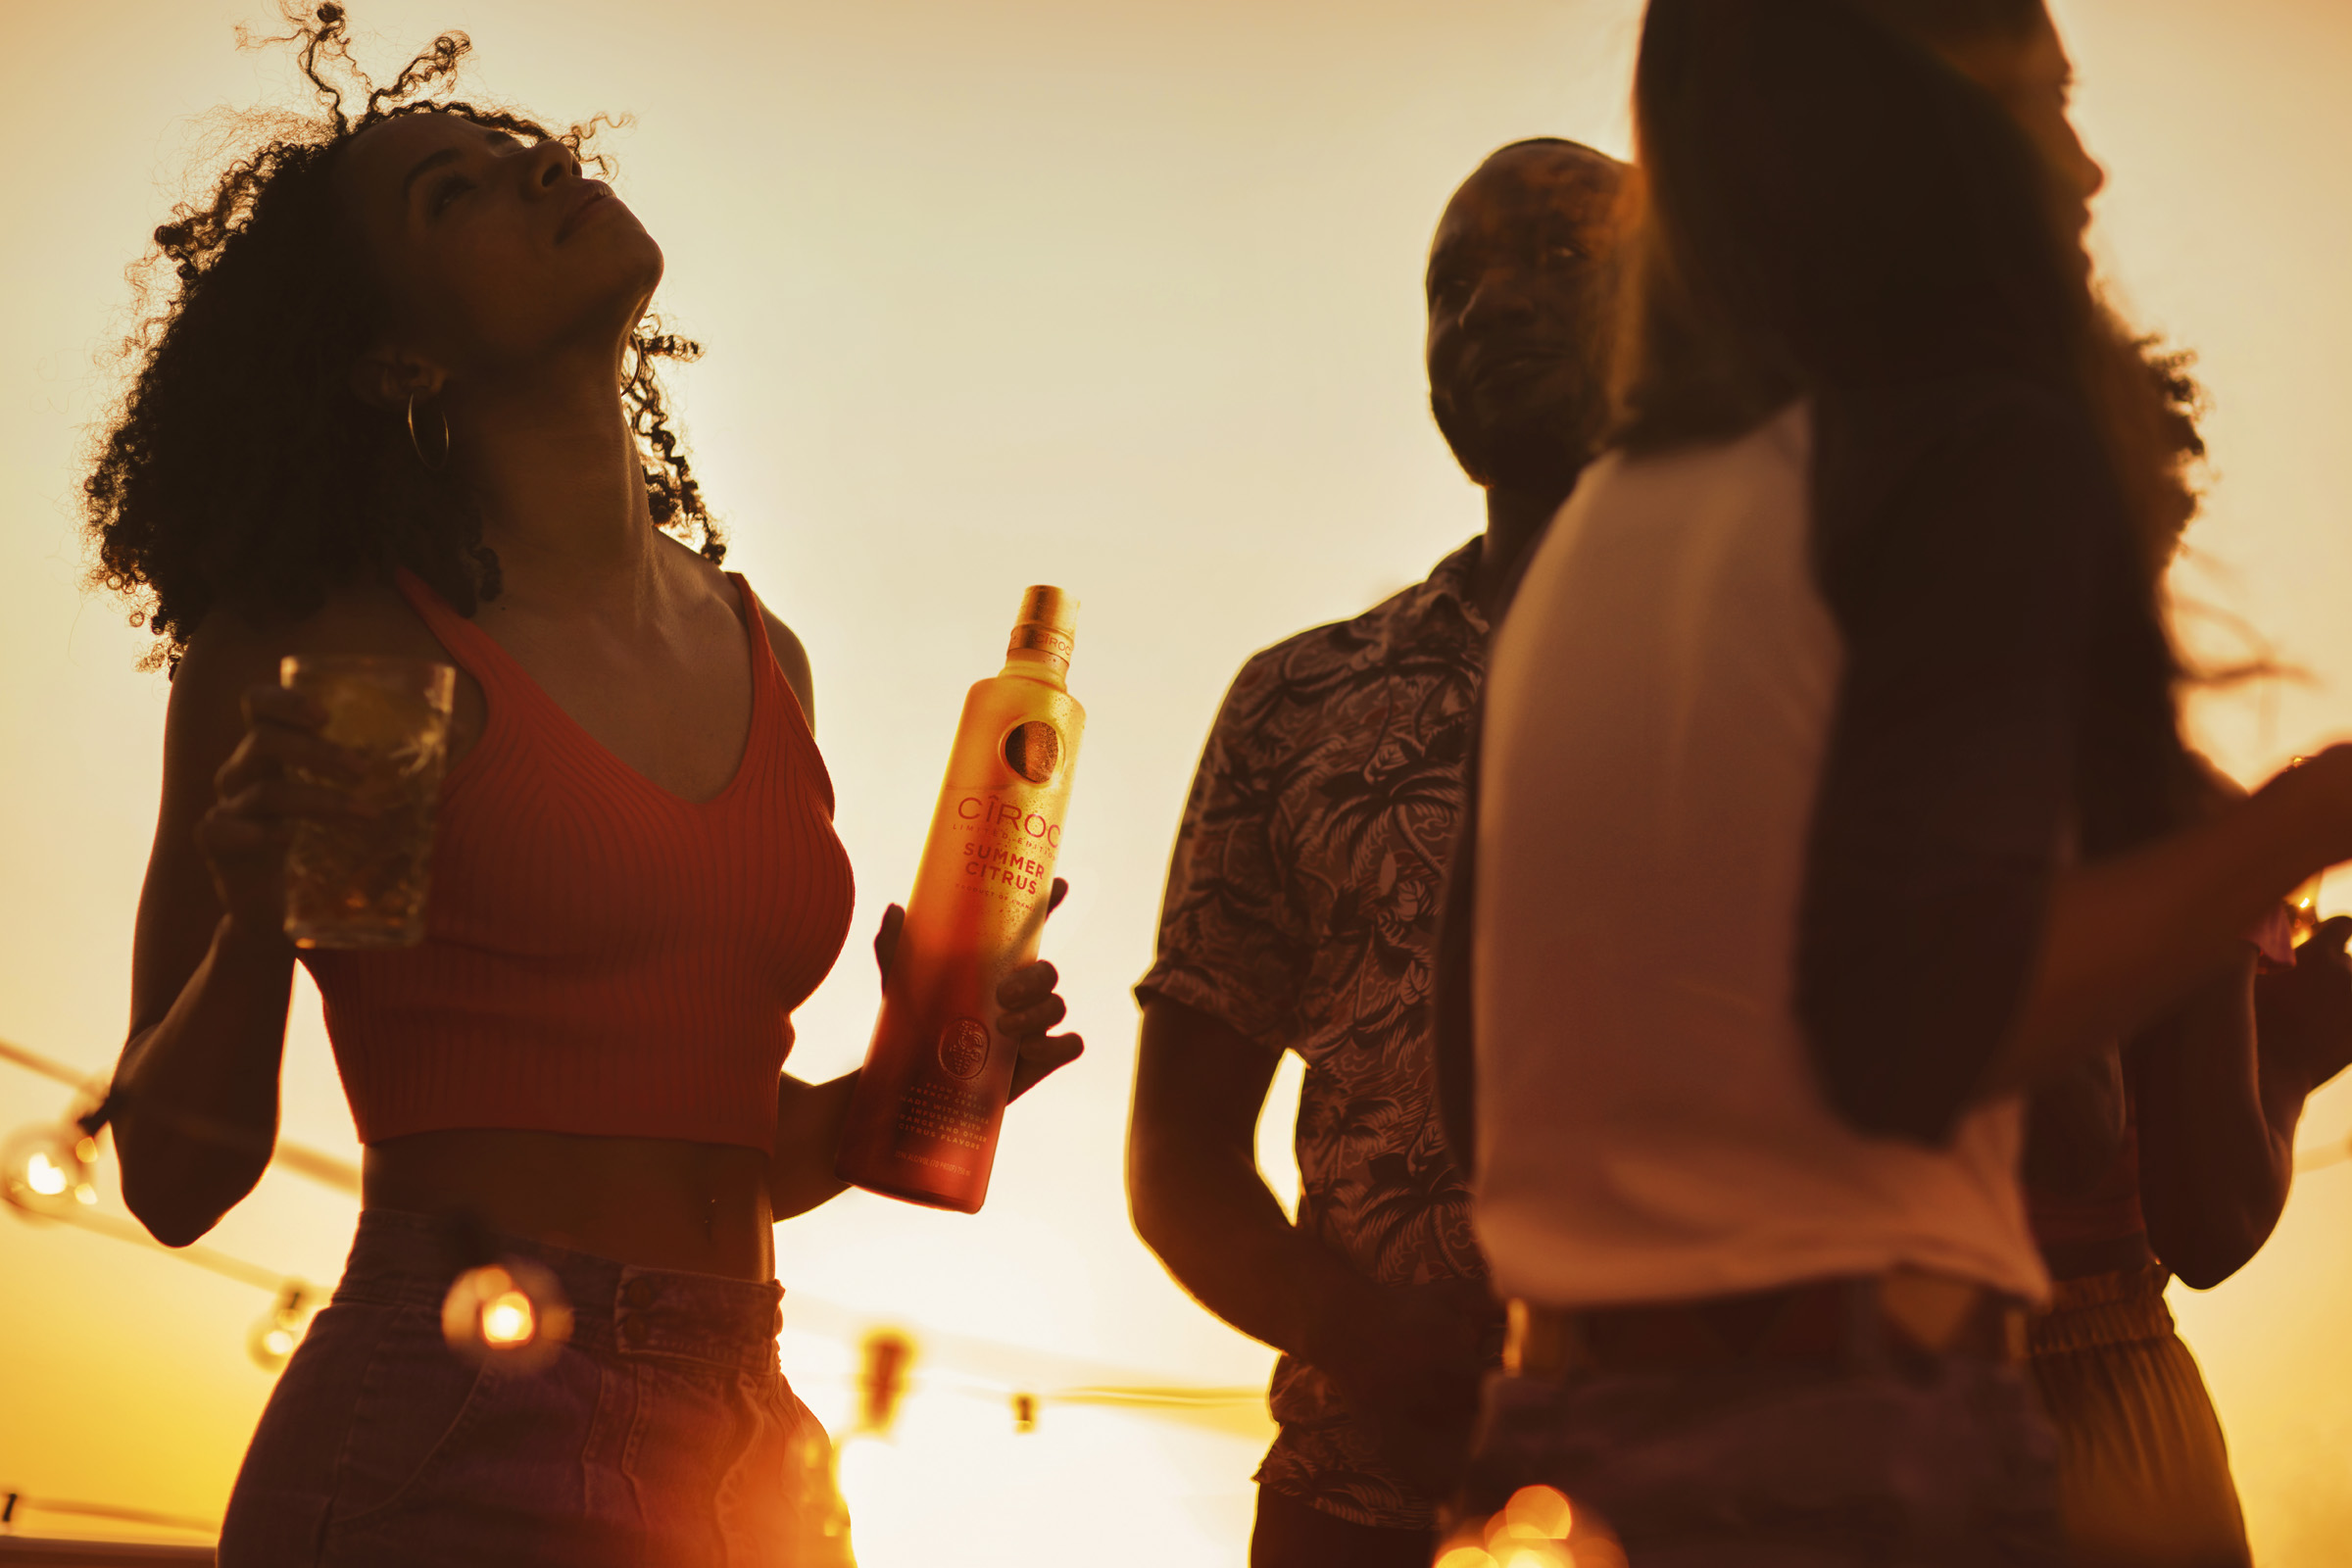 Party with women and a bottle  of CÎROC Summer Citrus.